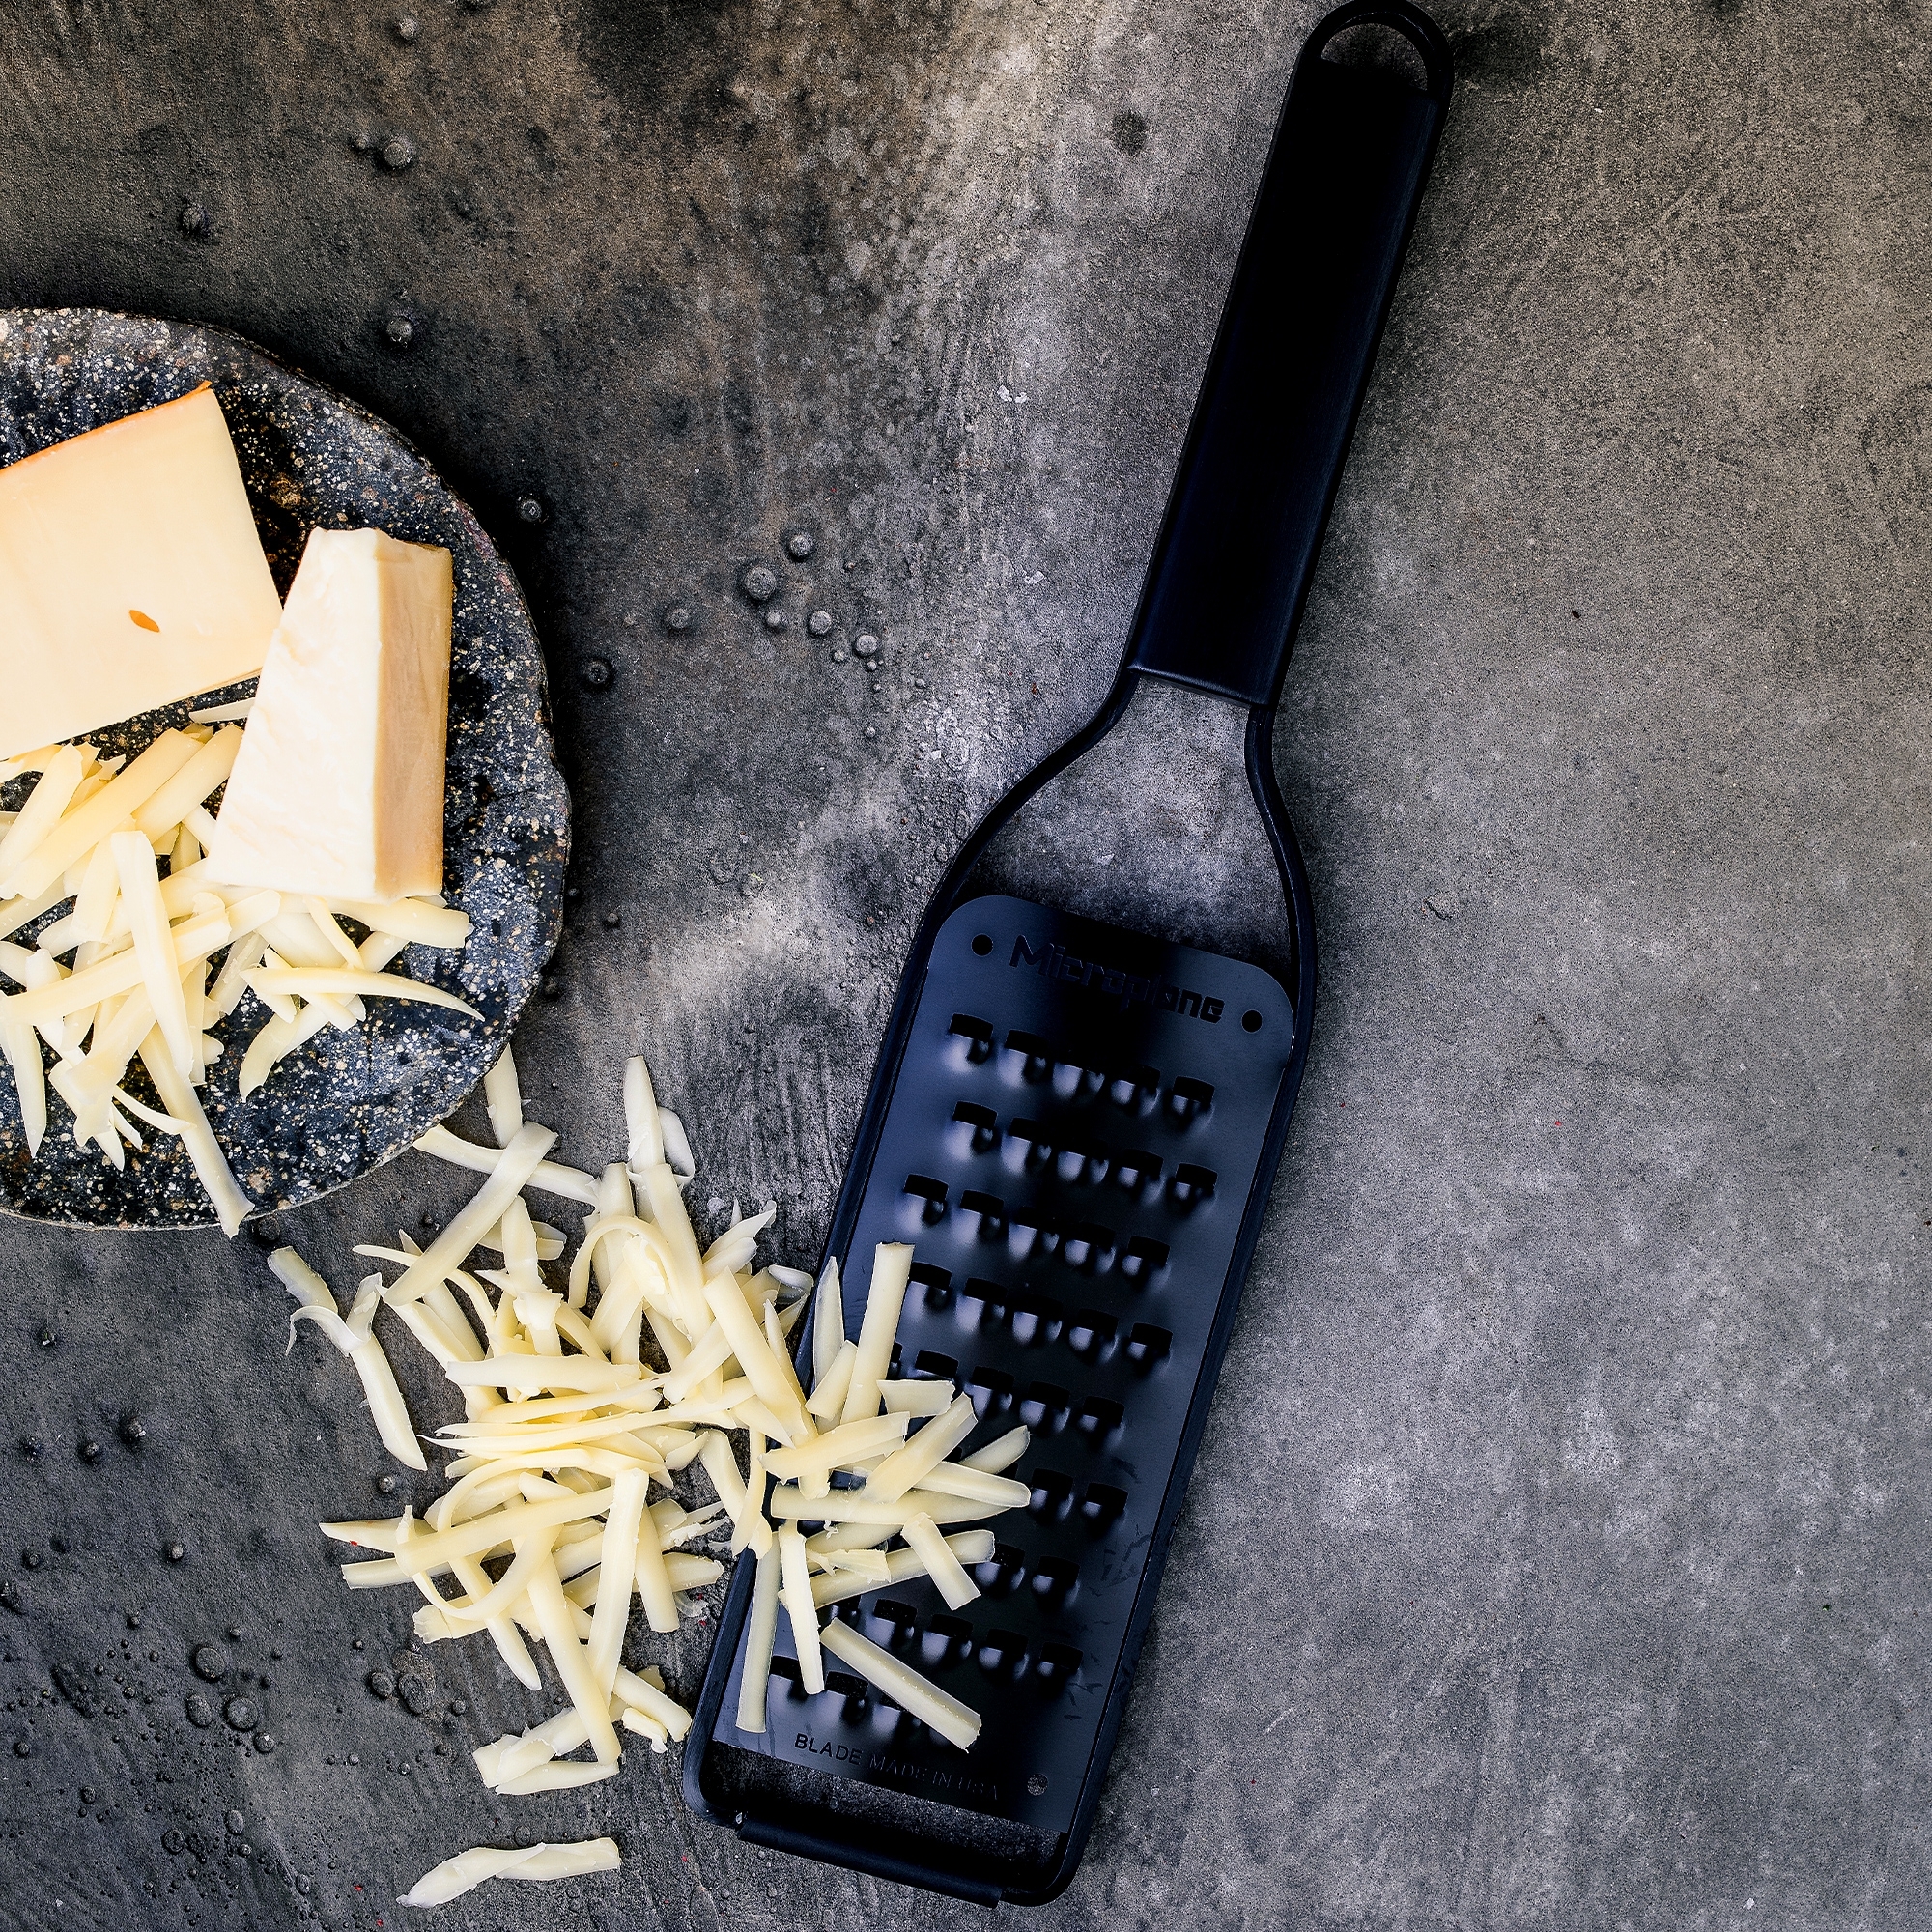 Microplane - Extra Coarse Grater - Black Sheep Series